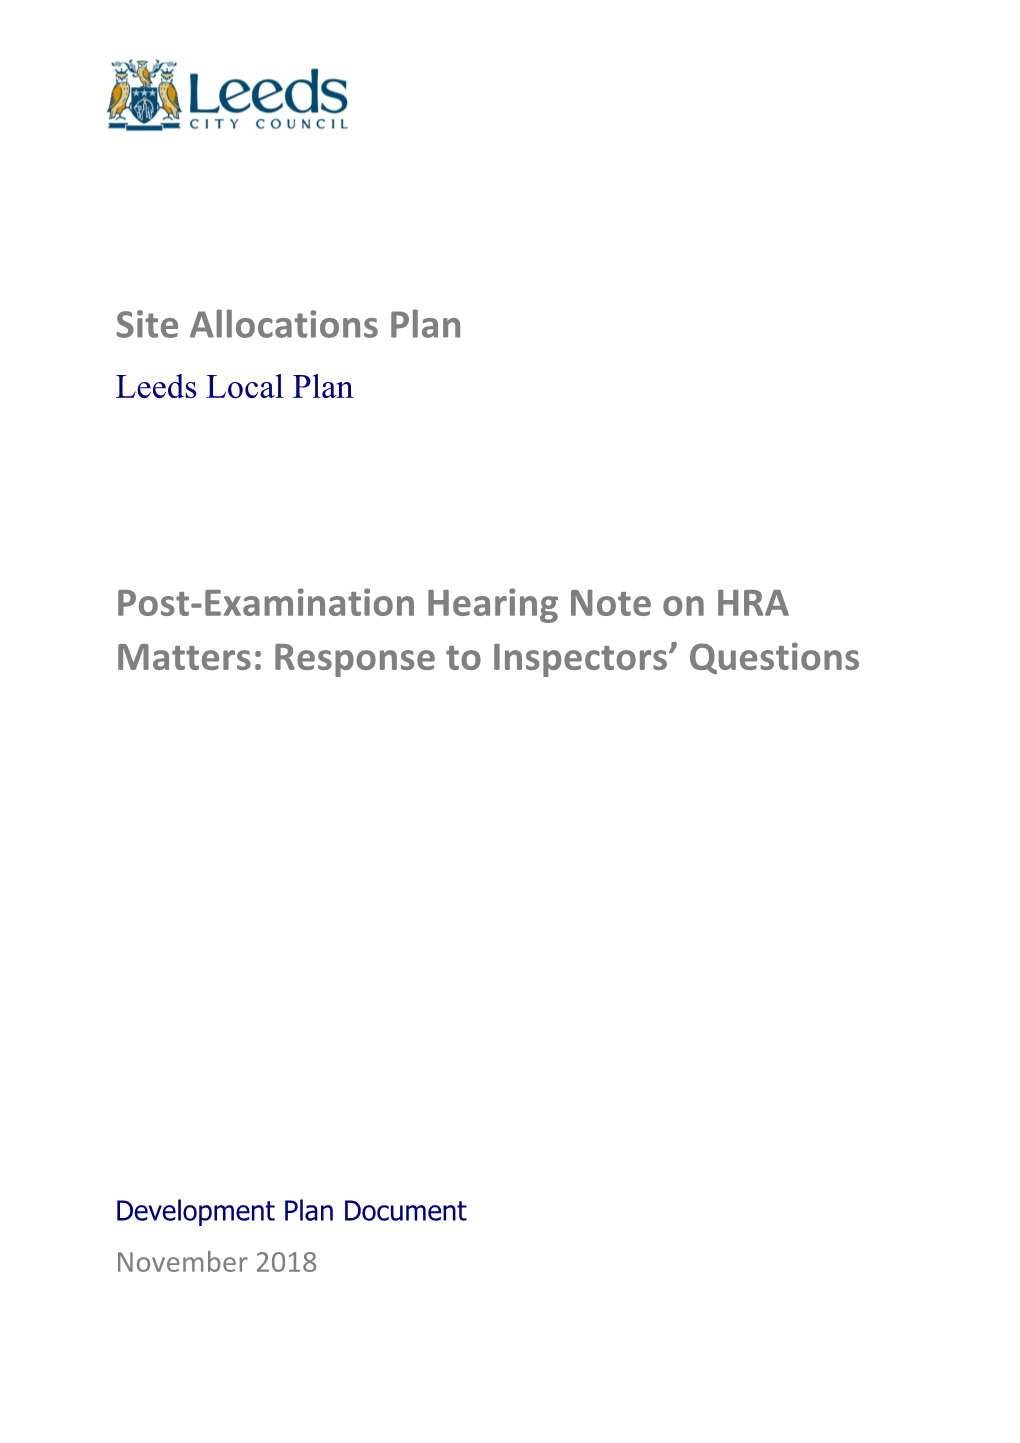 Site Allocations Plan Post-Examination Hearing Note On